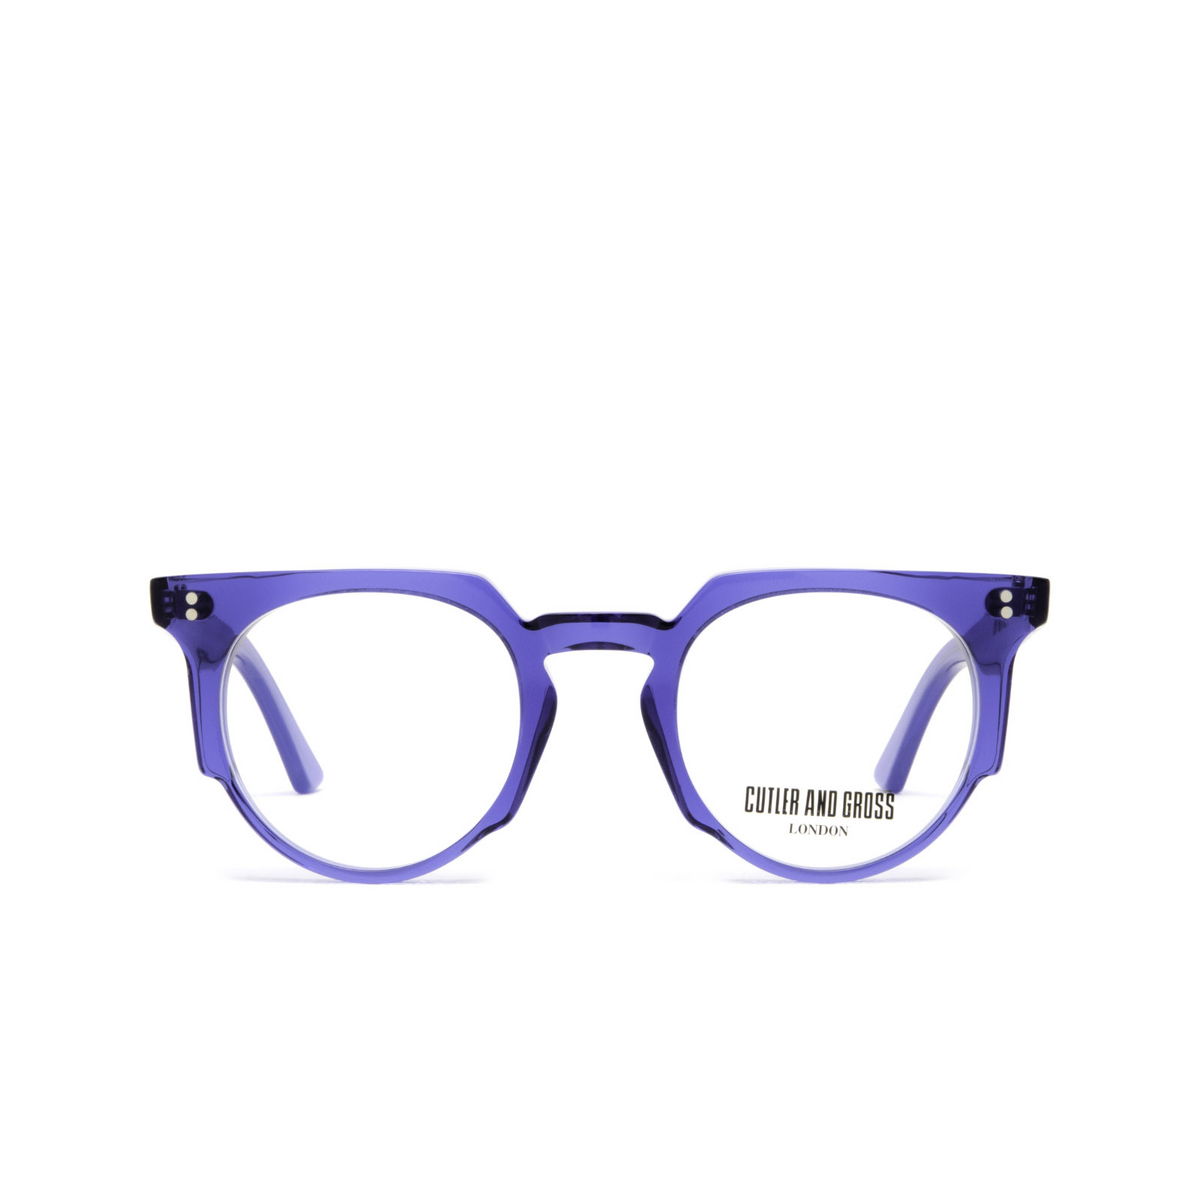 Cutler and Gross 1383 Eyeglasses 04 Russian Blue - front view